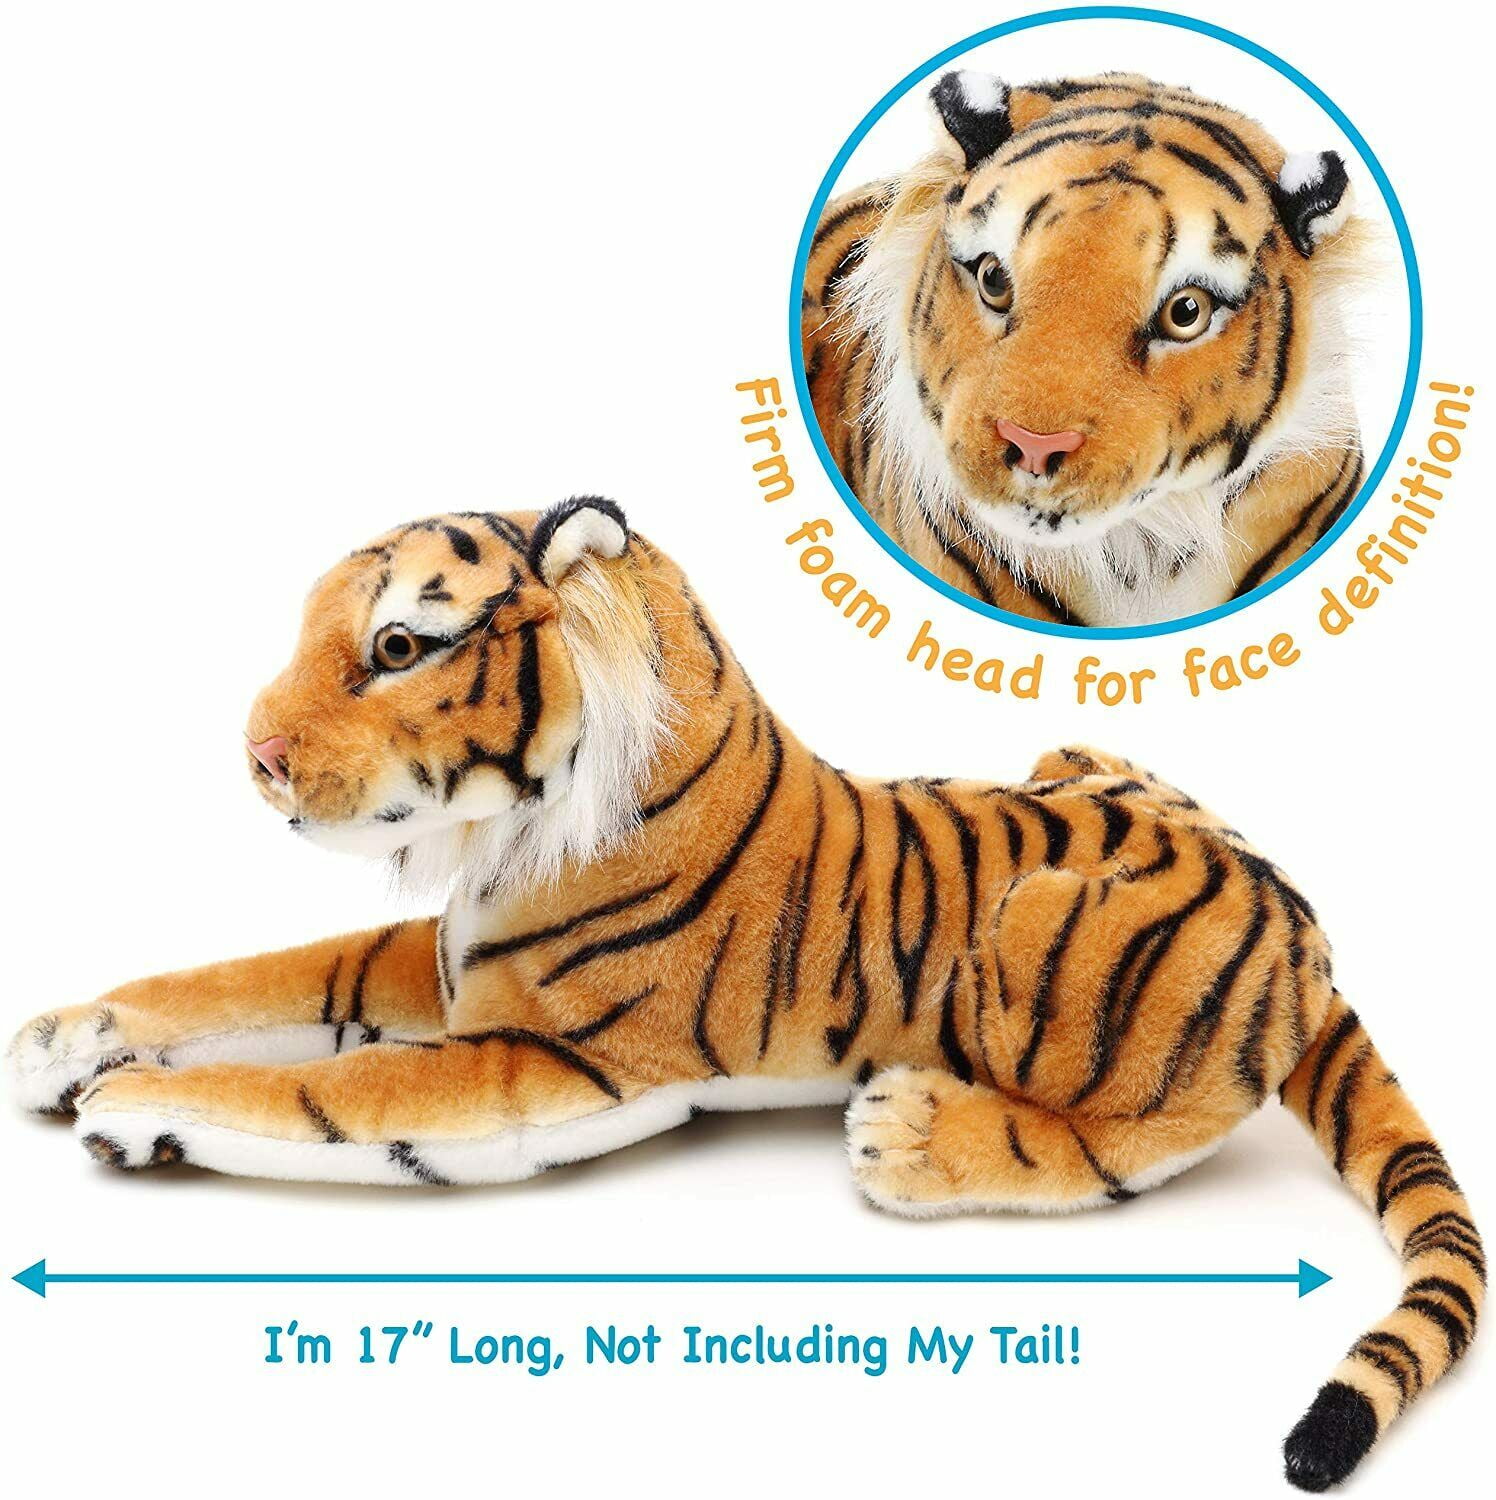 Tiger Stuffed Animal Plush Realistic Toy 18 inches 